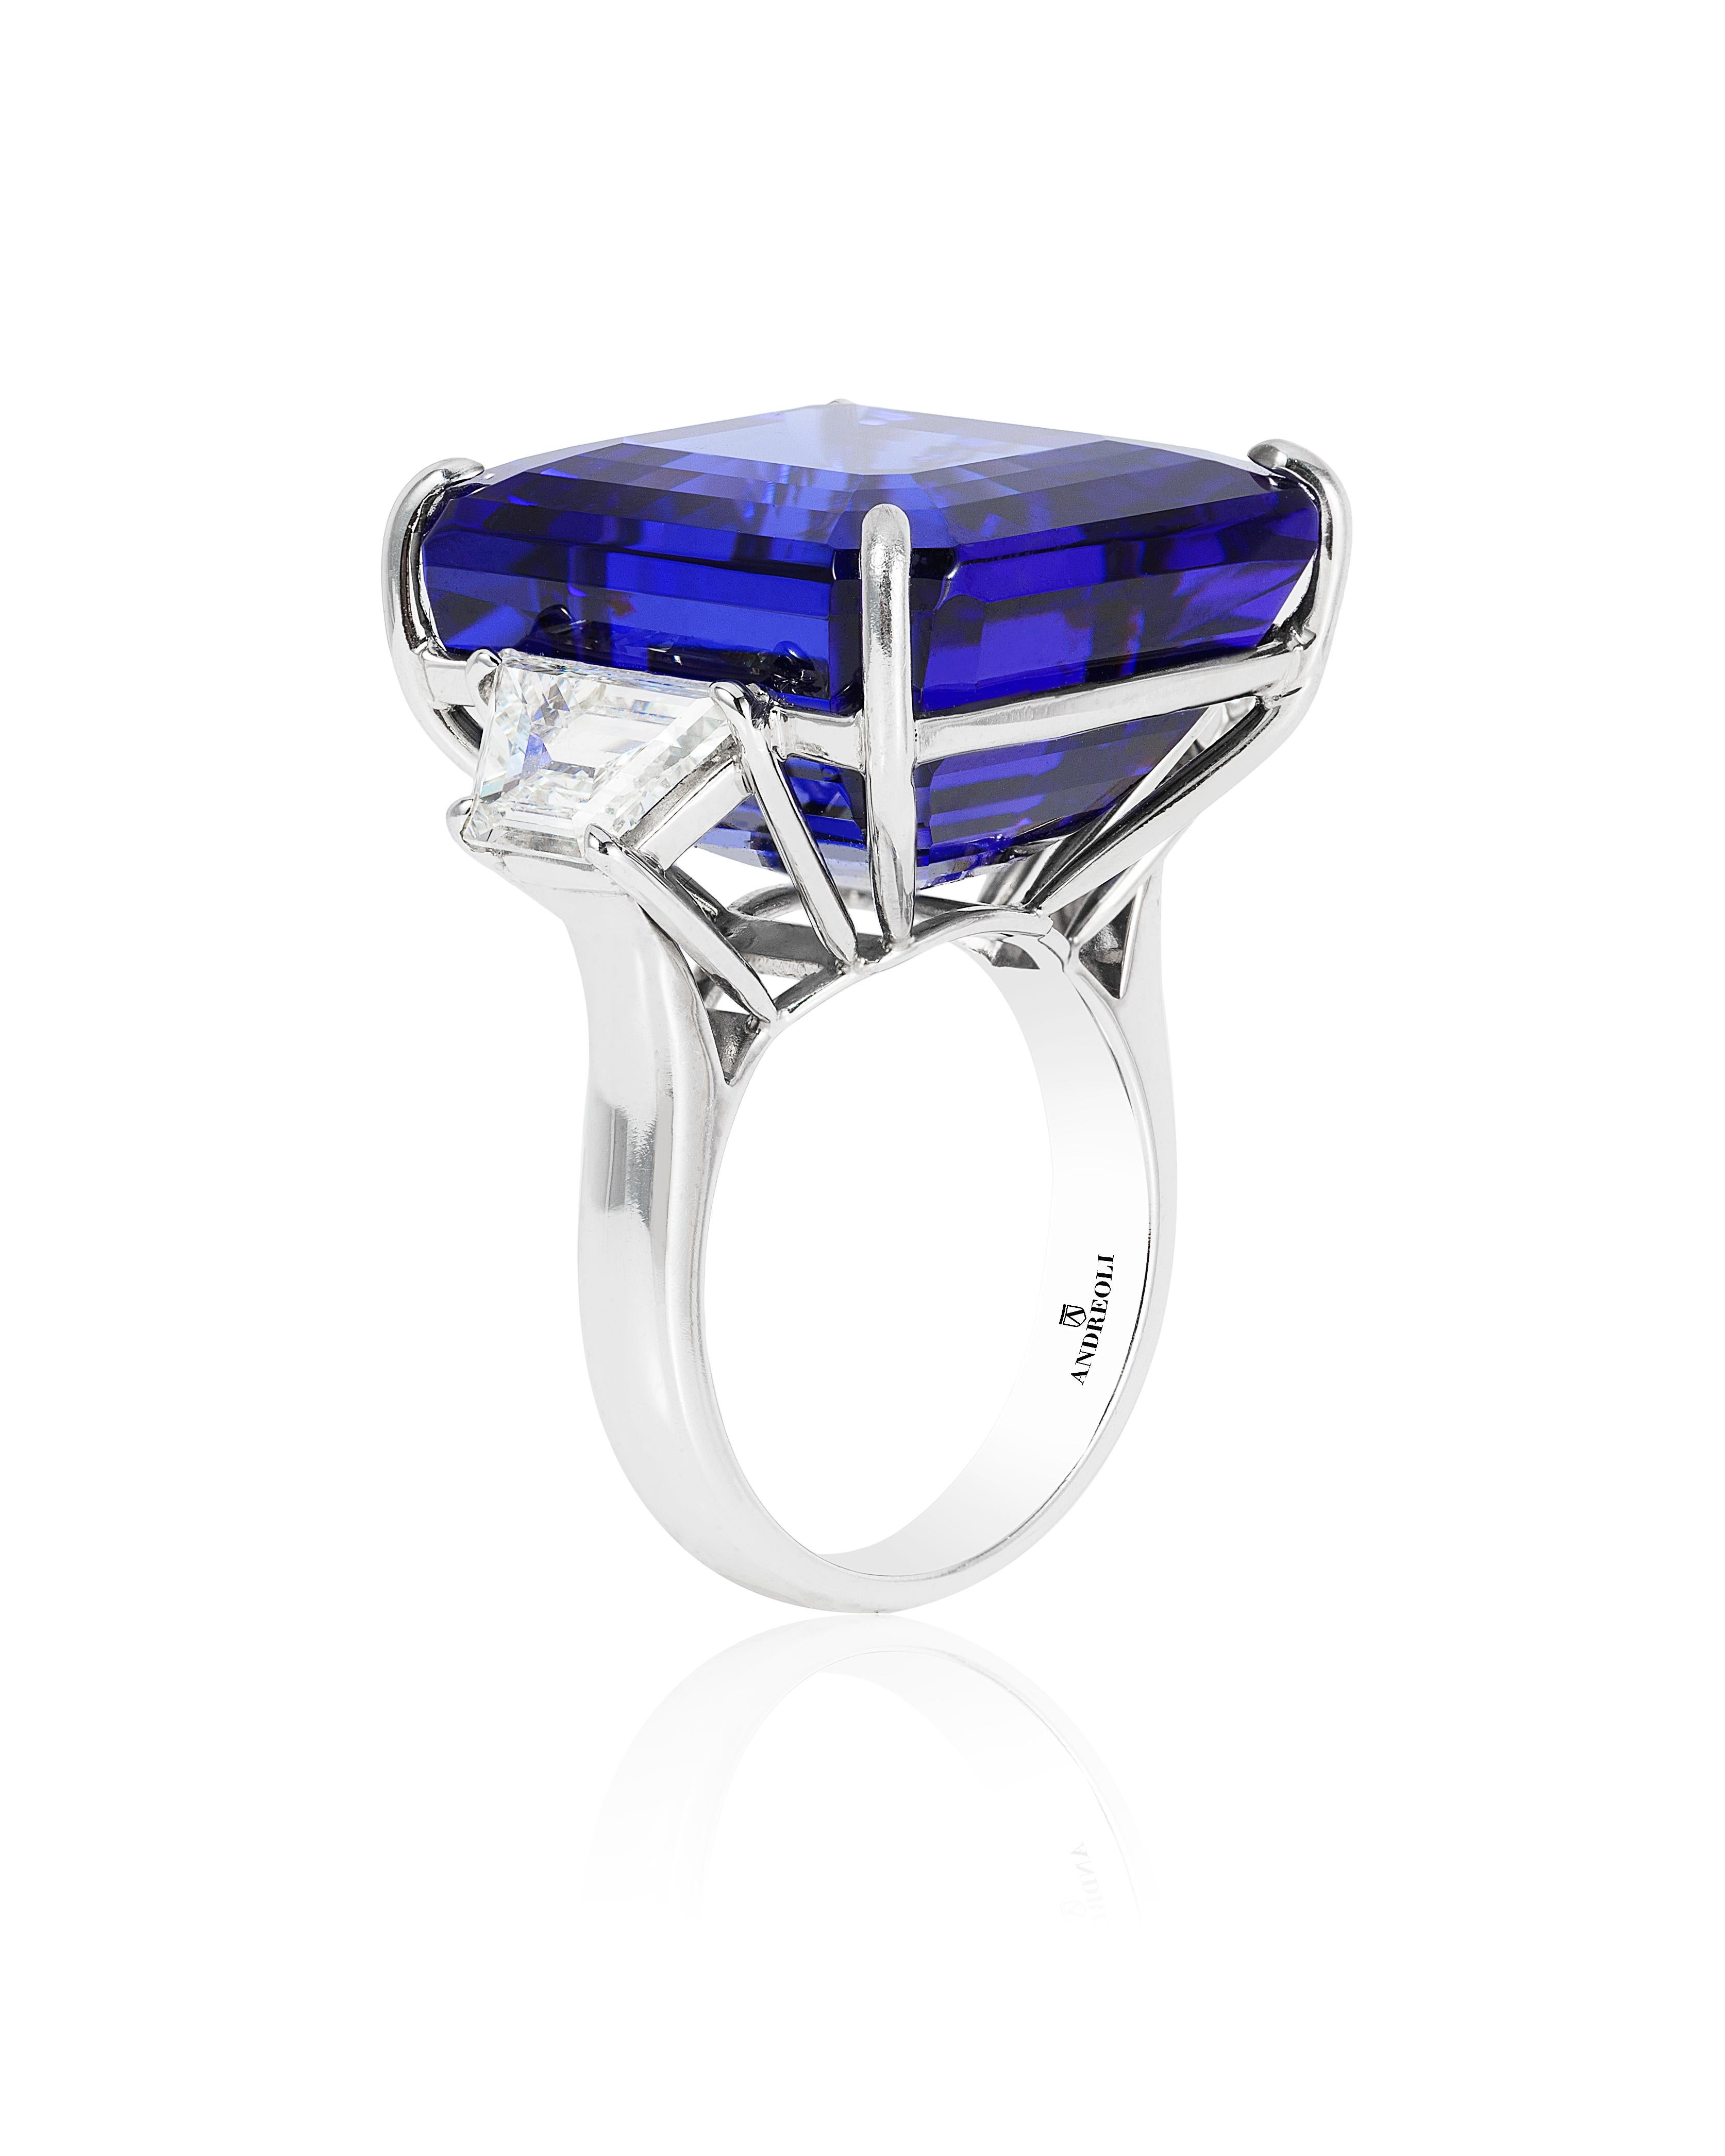 Andreoli CDC Certified 42.70 Carat Vivid Blue Tanzanite Diamond Platinum Ring. This ring features a 42.70 carat vivid blue tanzanite certified by C. Dunaigre Switzerland lab. Accented with two trapezoid step cut diamonds 1.87 carats. Set in